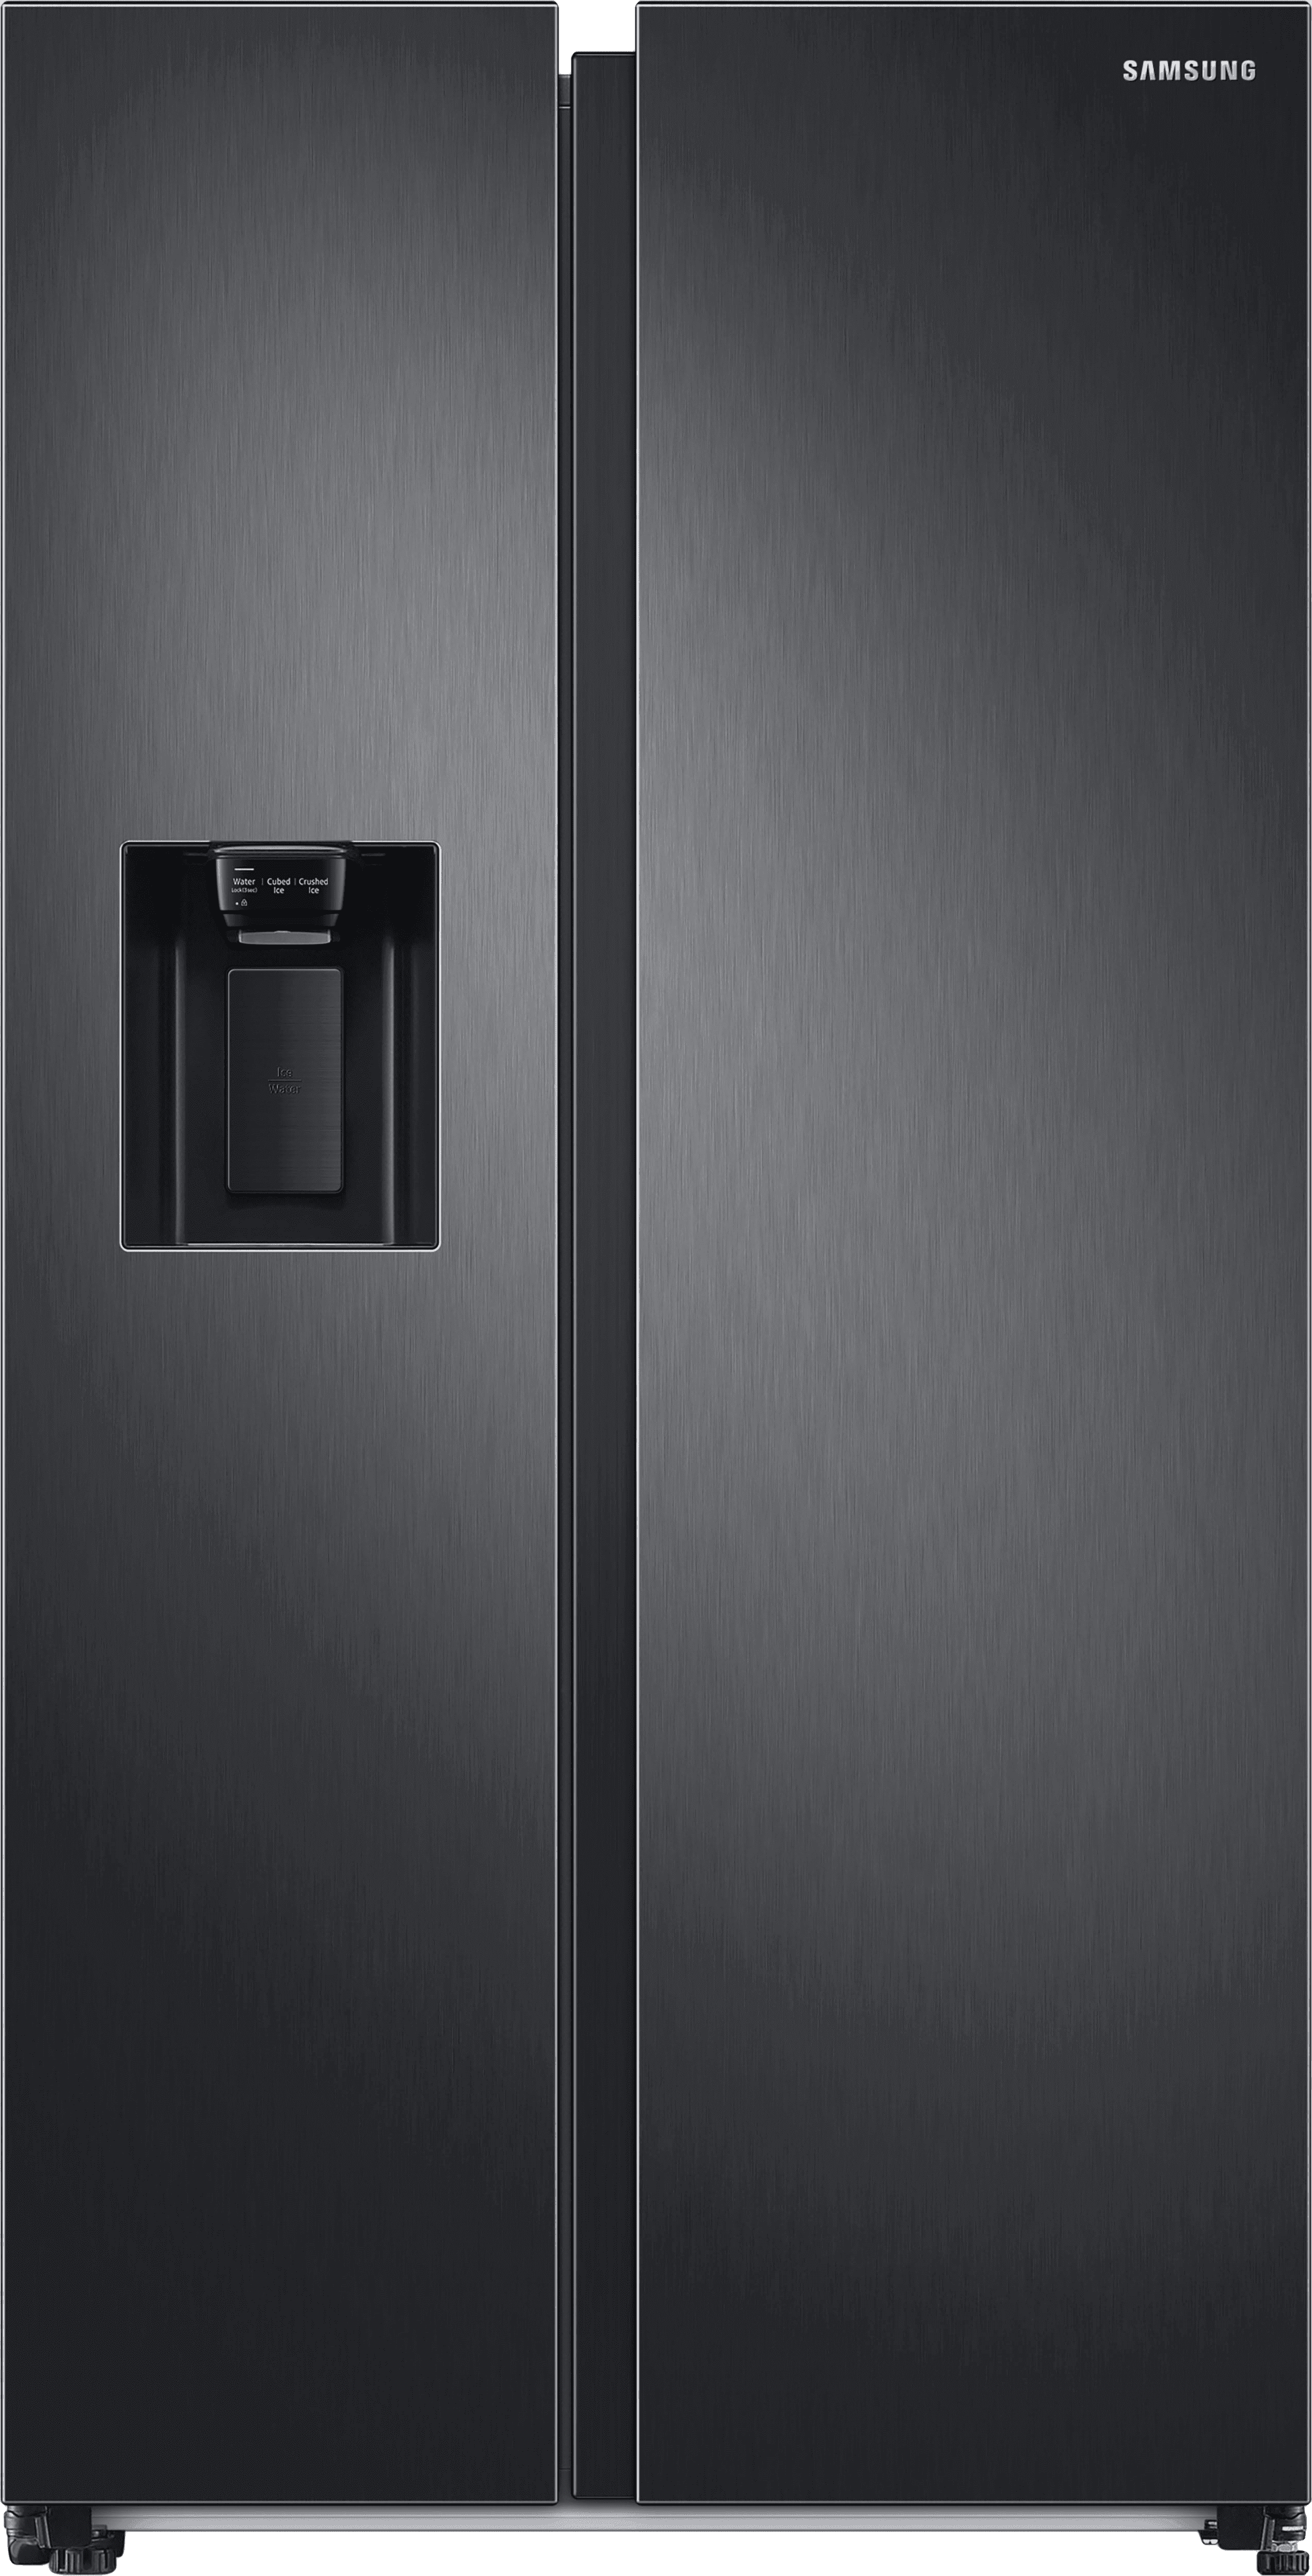 Samsung Series 8 RS68A884CB1 Plumbed Frost Free American Fridge Freezer - Black - C Rated, Black